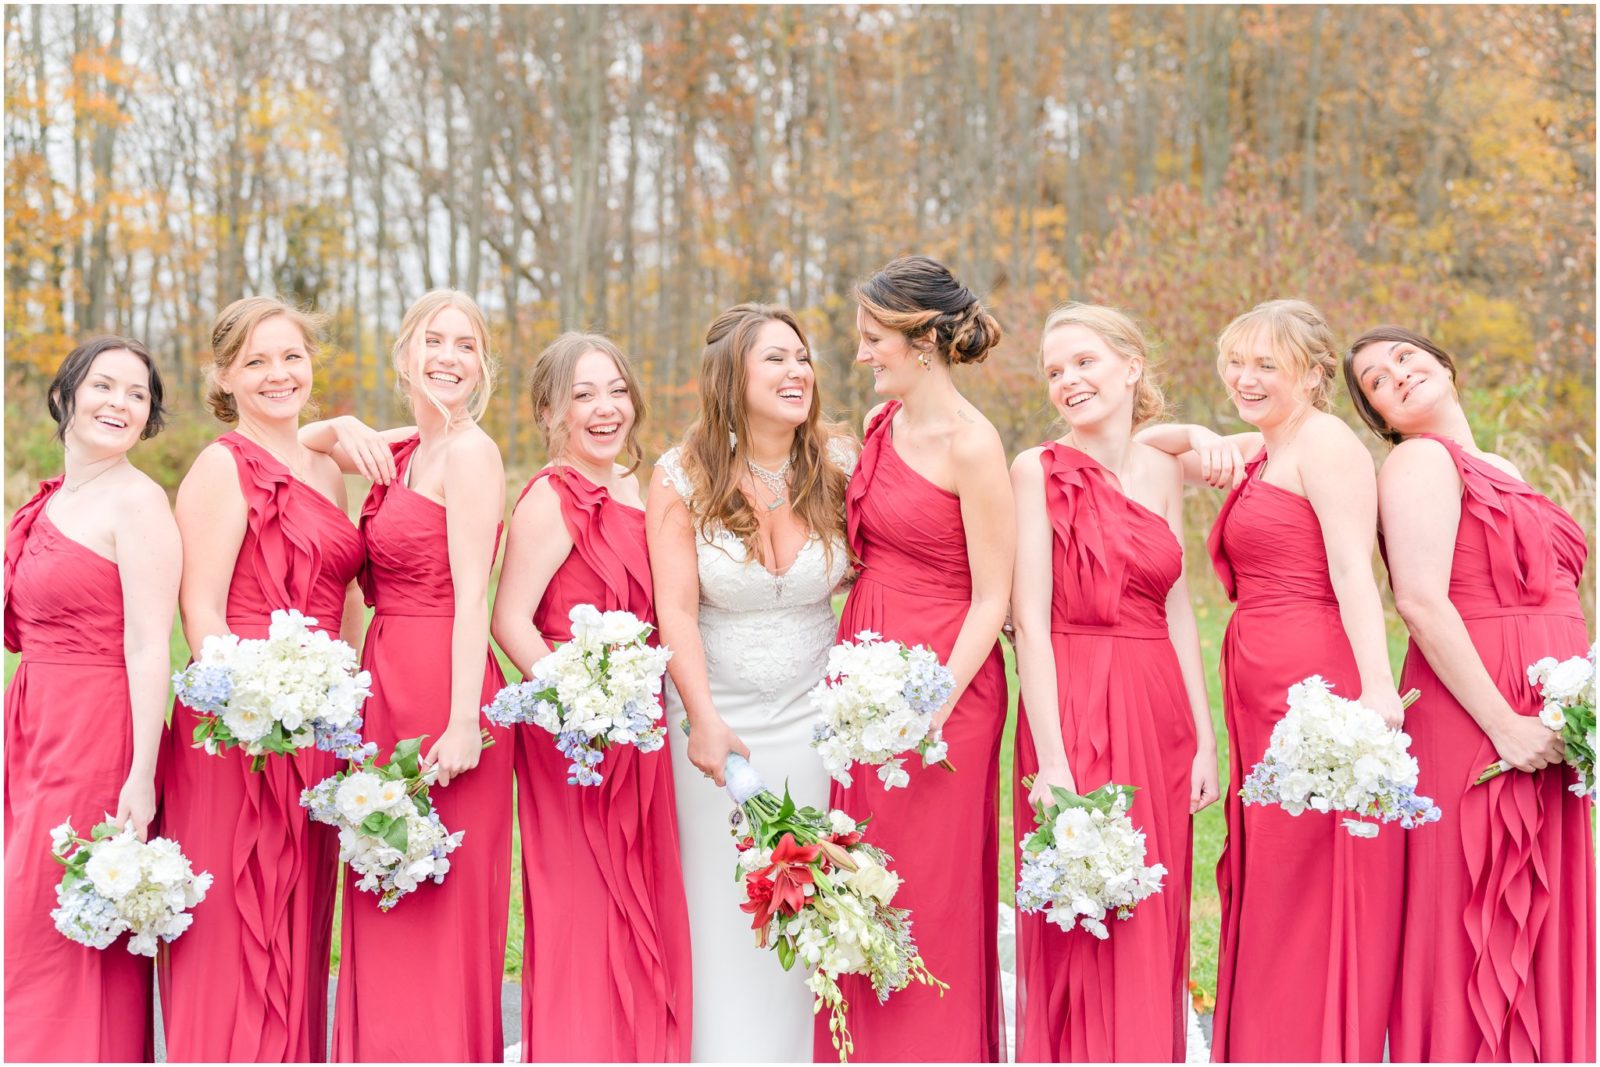 Bride and bridesmaids laughing together Mt Gilead Church wedding